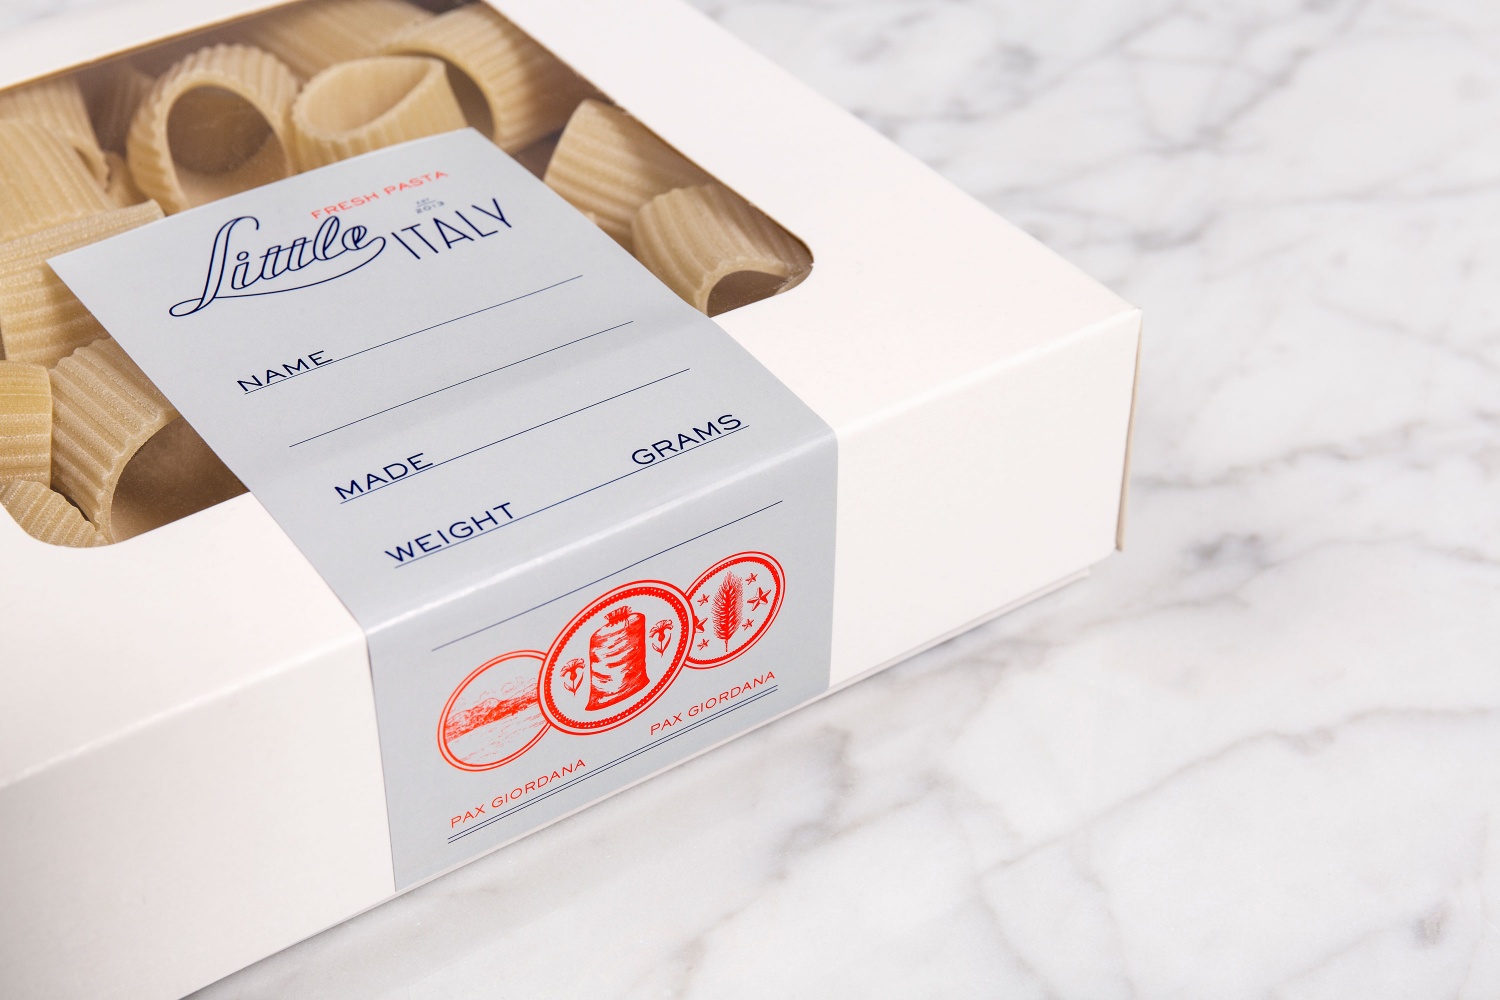 Branding and packaging by British studio Here Design for Amman-based restaurant Little Italy